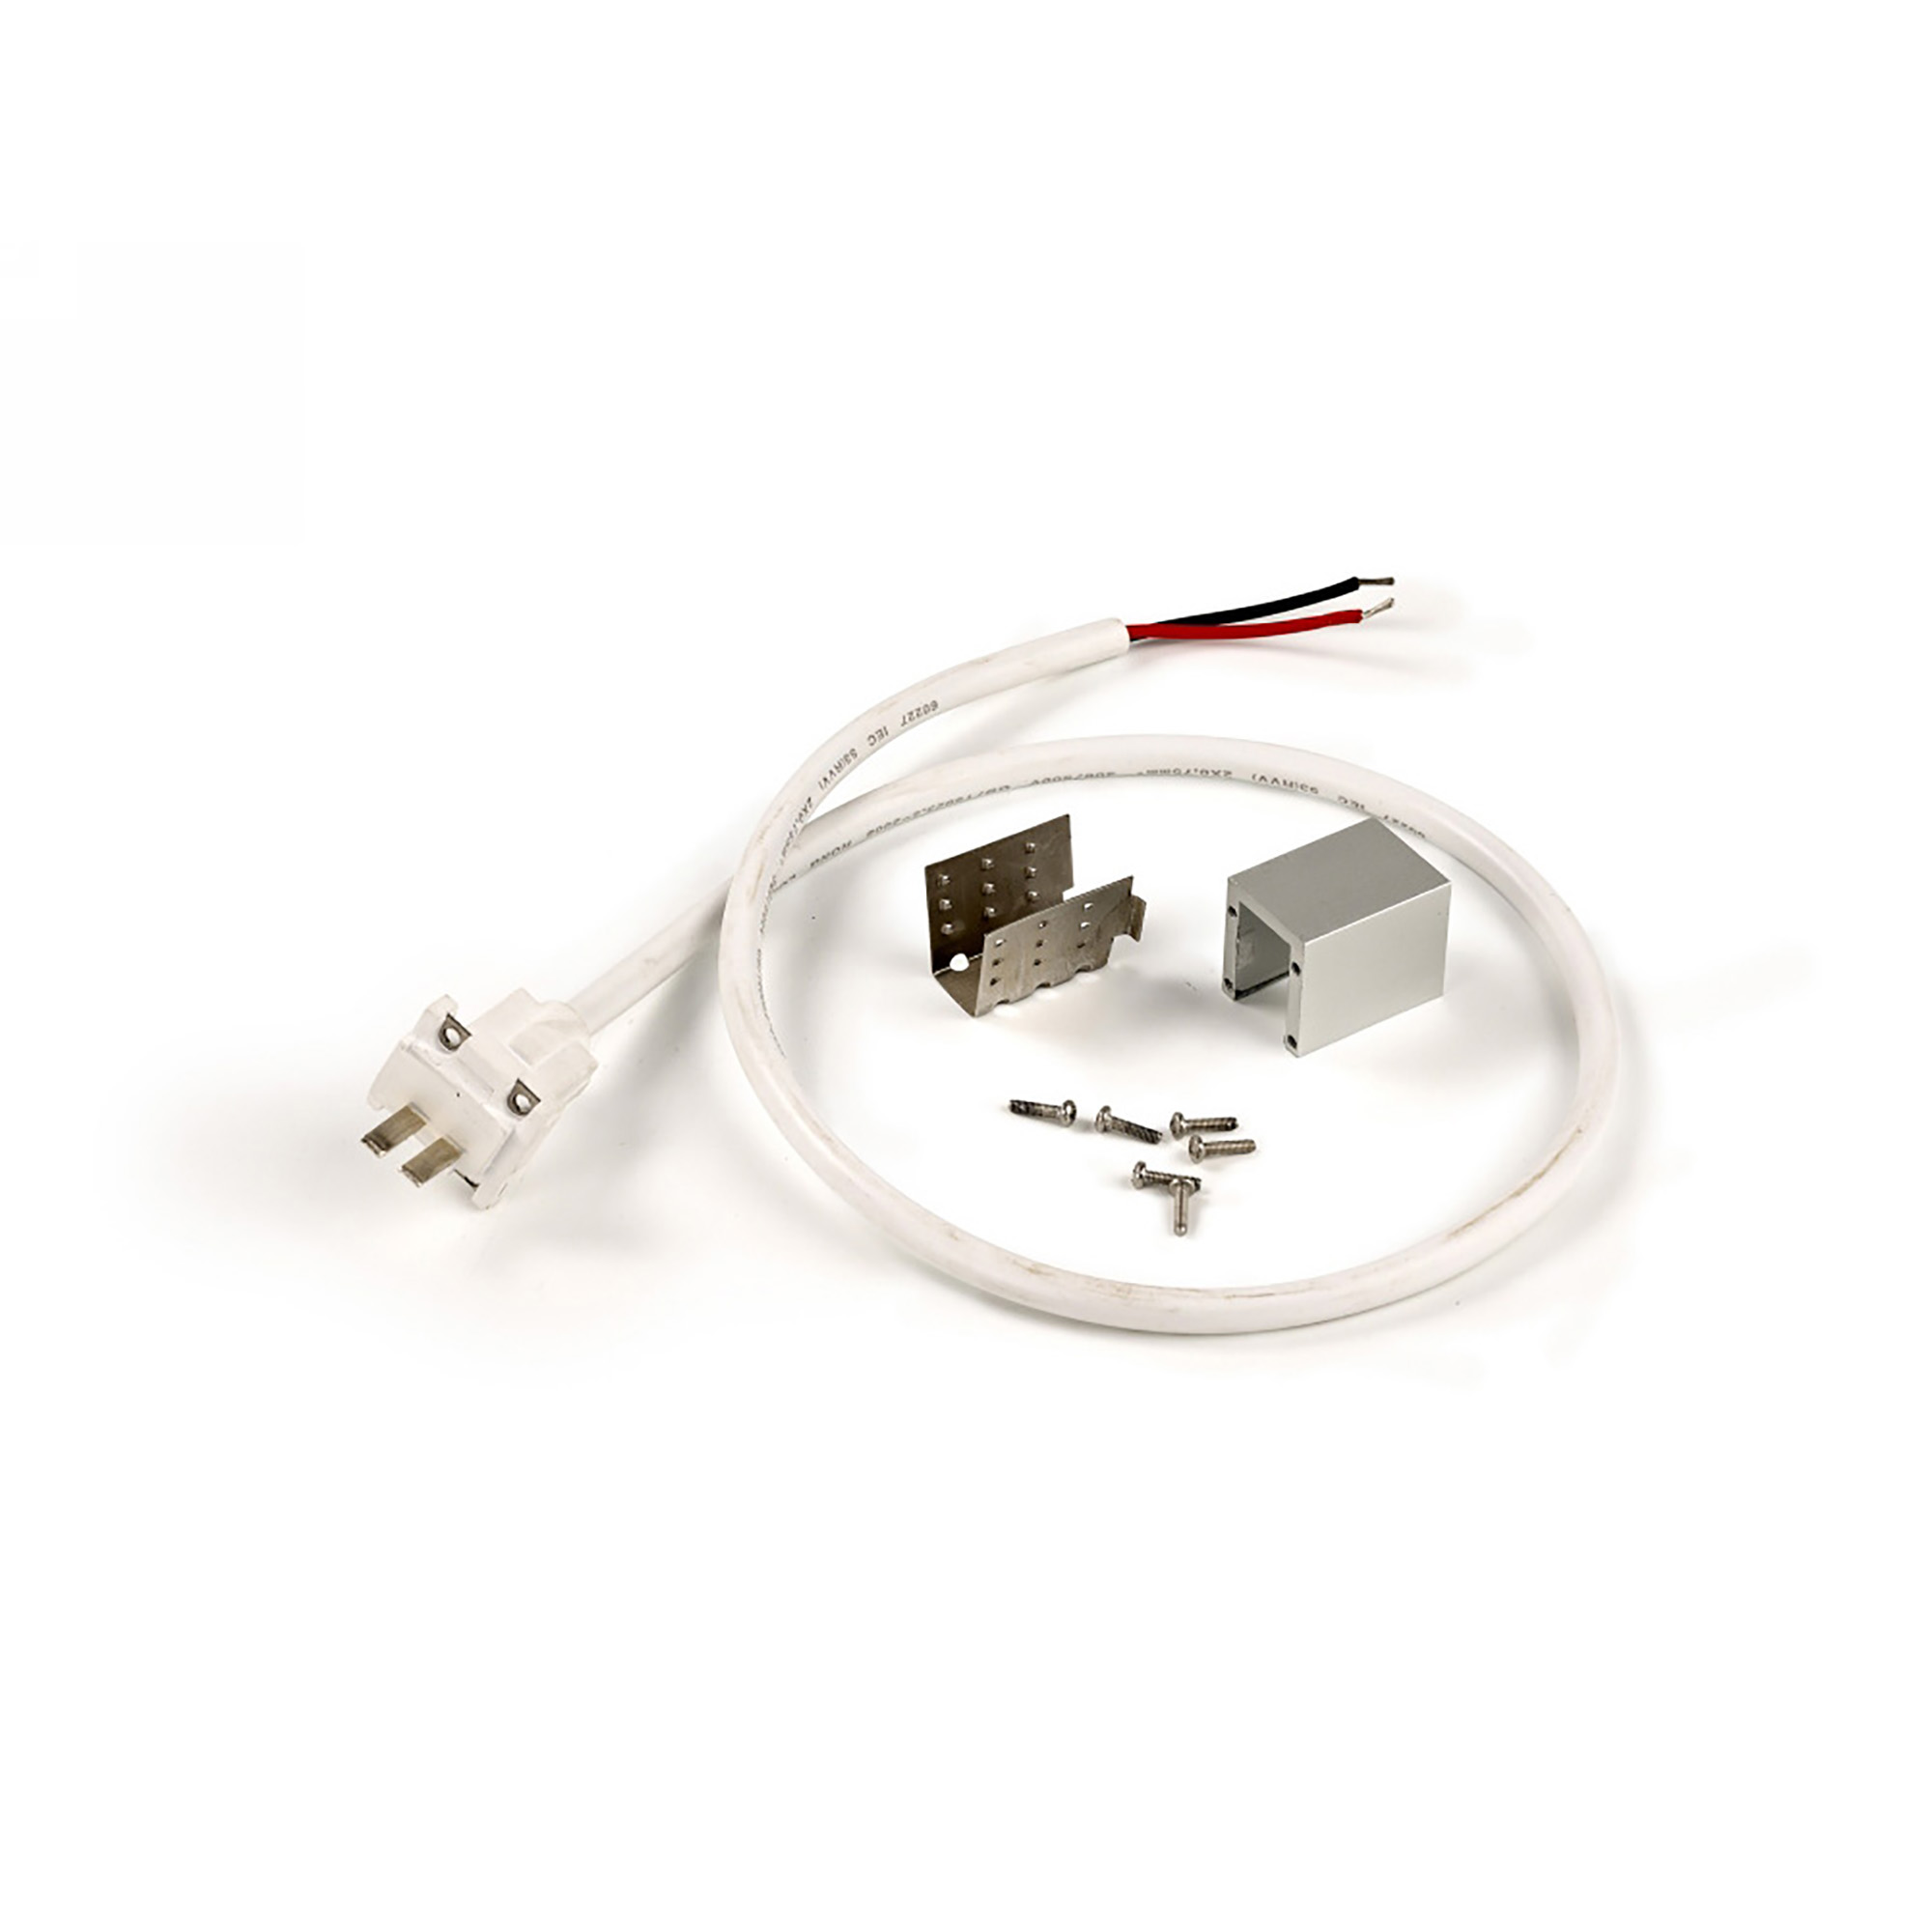 DX770042  Nexi 60 SF/SR; Front Right Side Connection Kit 0.6m Cable IP67/68